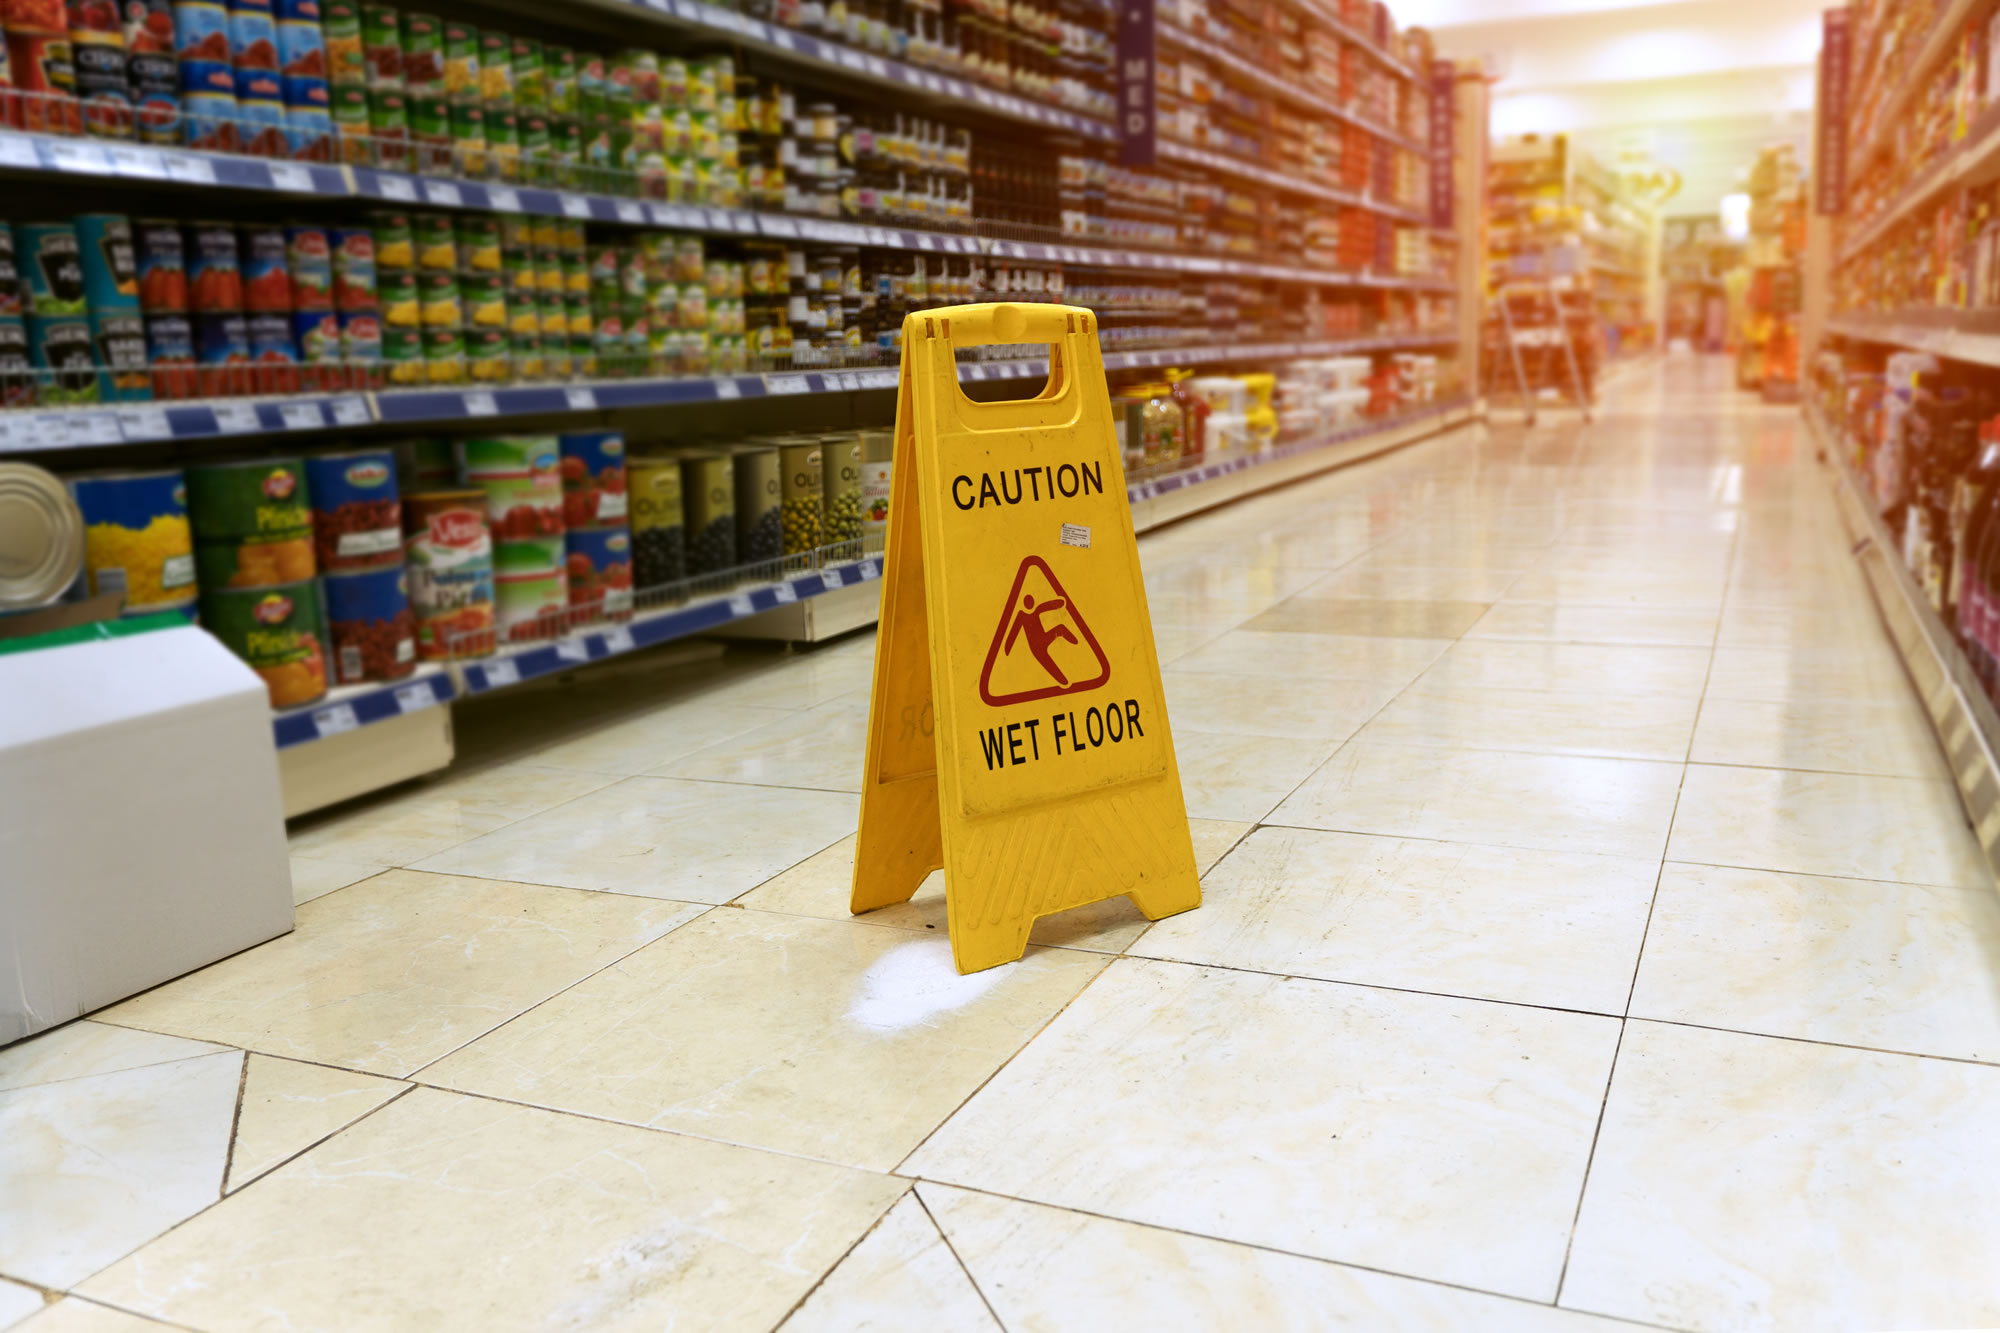 Slips, Trips & Falls in public supermarkets, shops and shopping centres